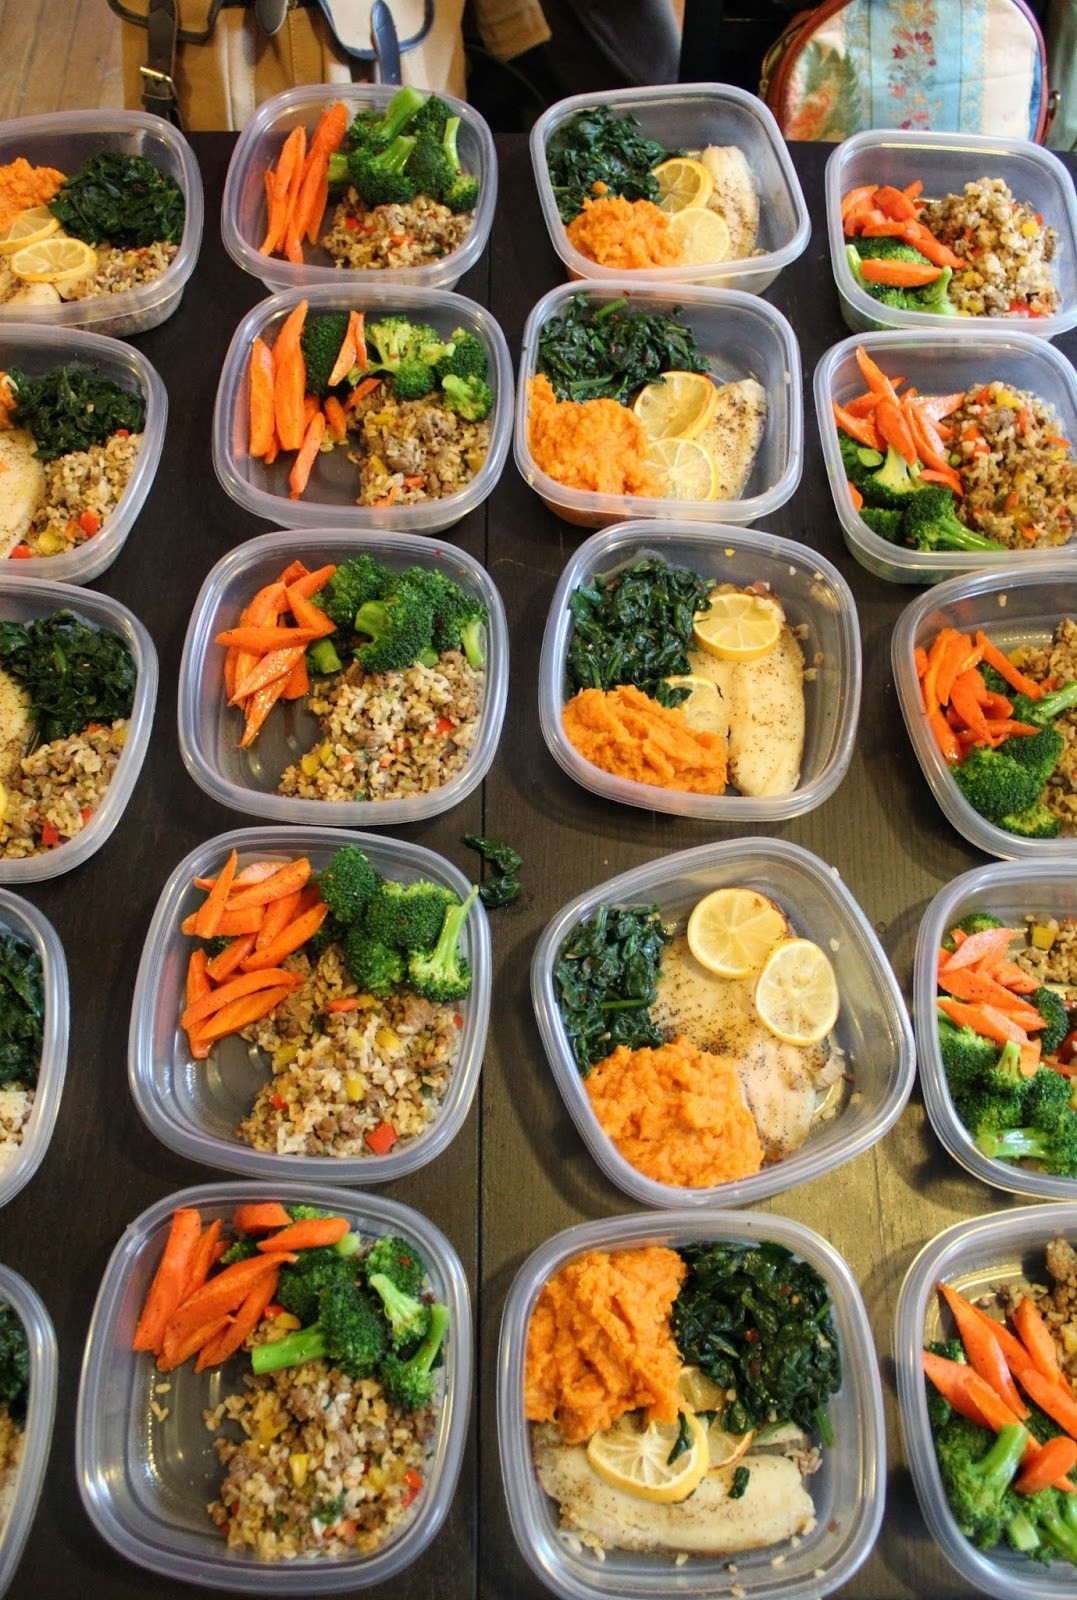 Healthy Affordable Dinners
 Healthy Meal Prep Ideas For The WeekWritings and Papers